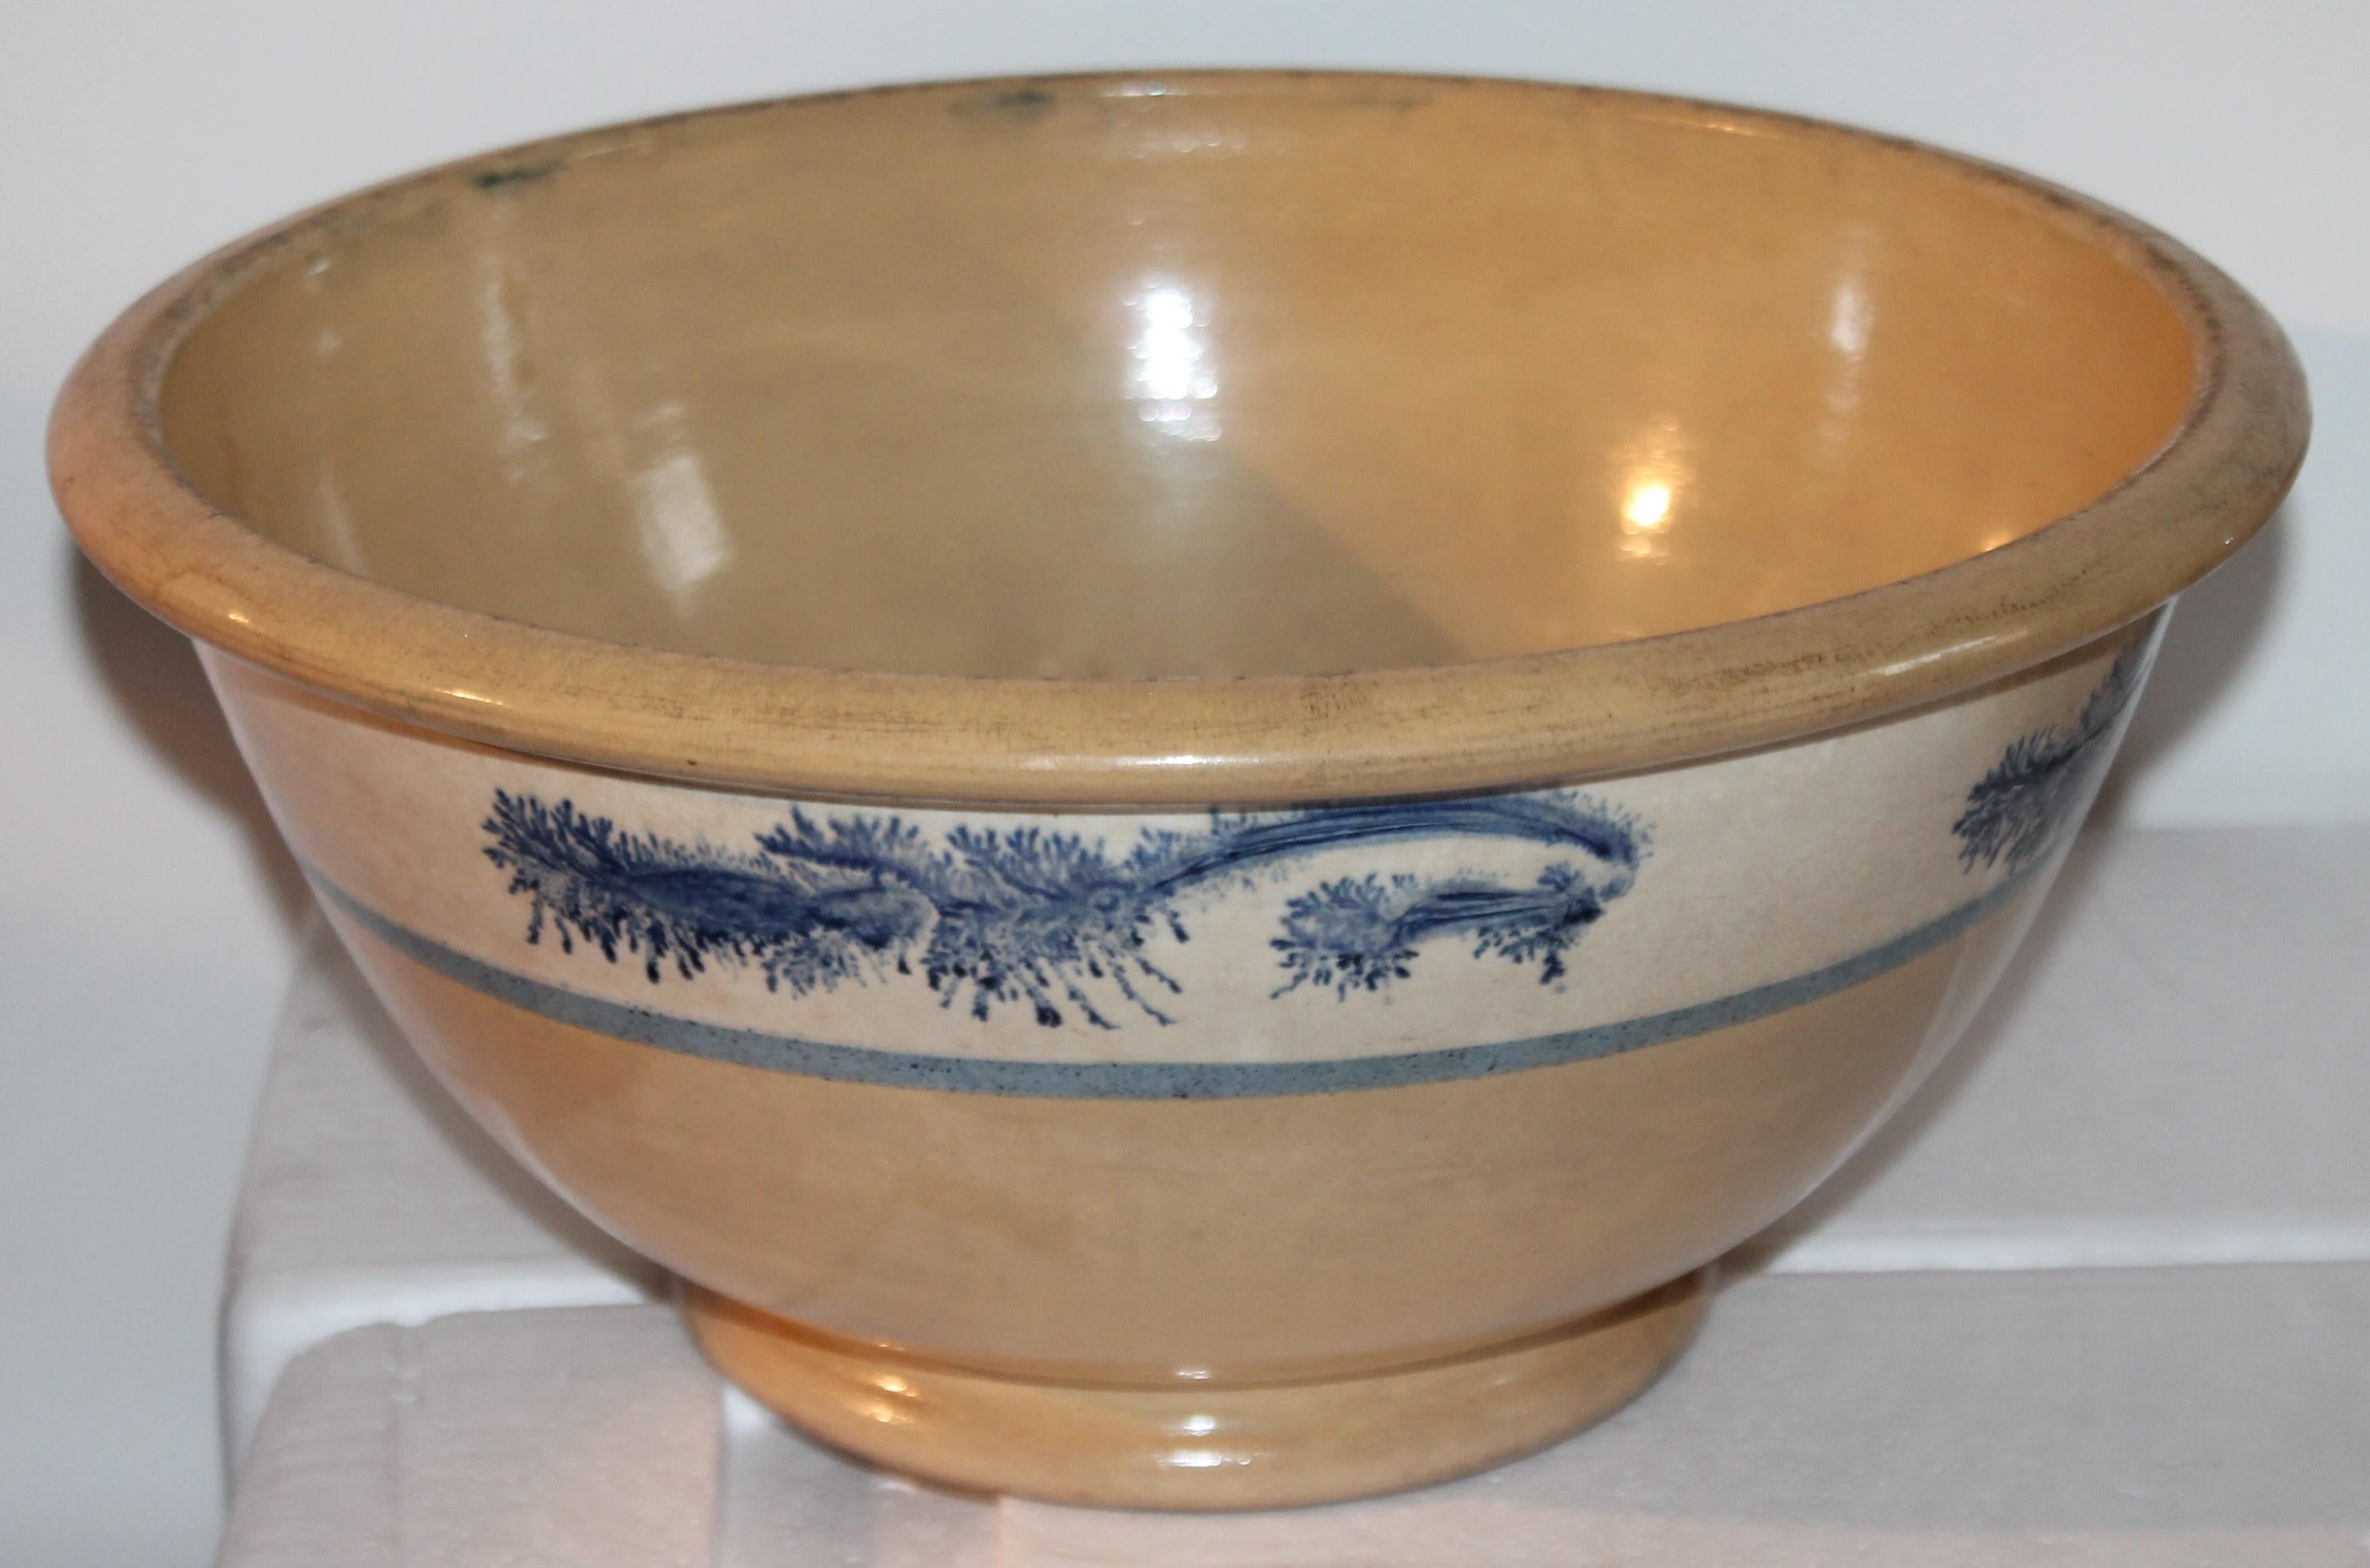 This large mocha blue seaweed yellow ware mixing bowl is in fine condition. Has a very nice decoration of blue seaweed pattern on the outside band.